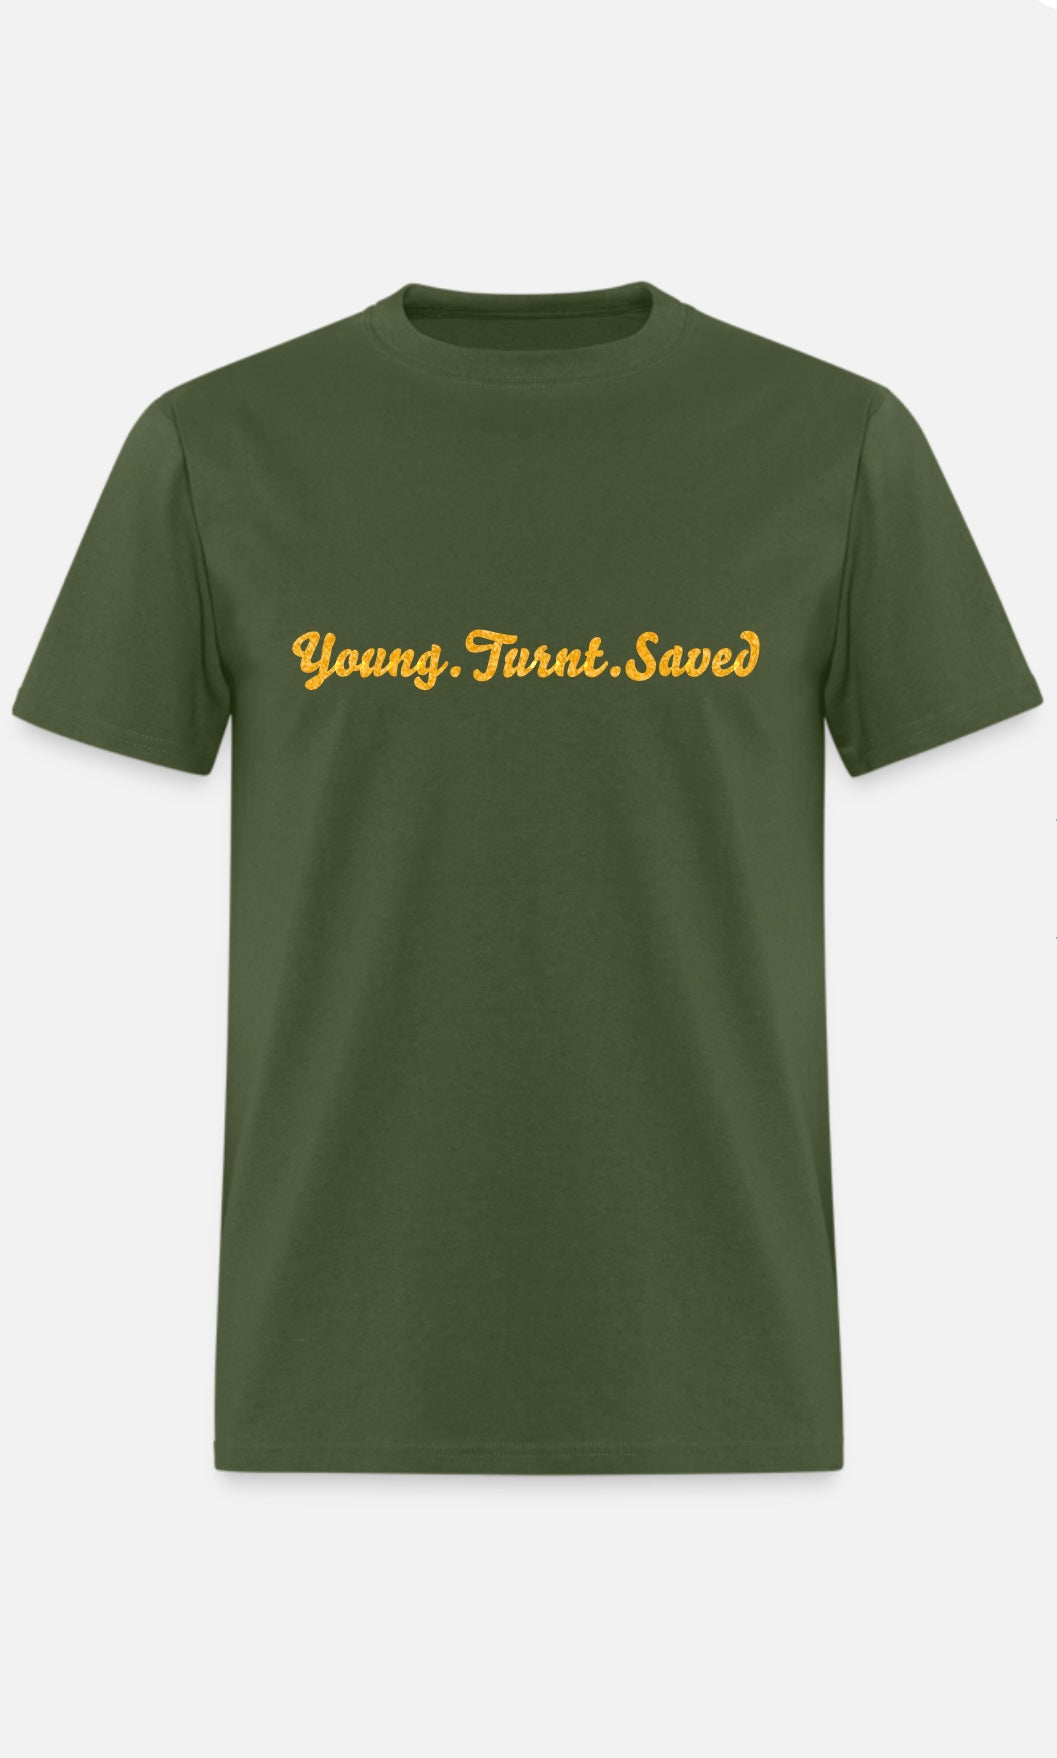 young turnt & saved tee